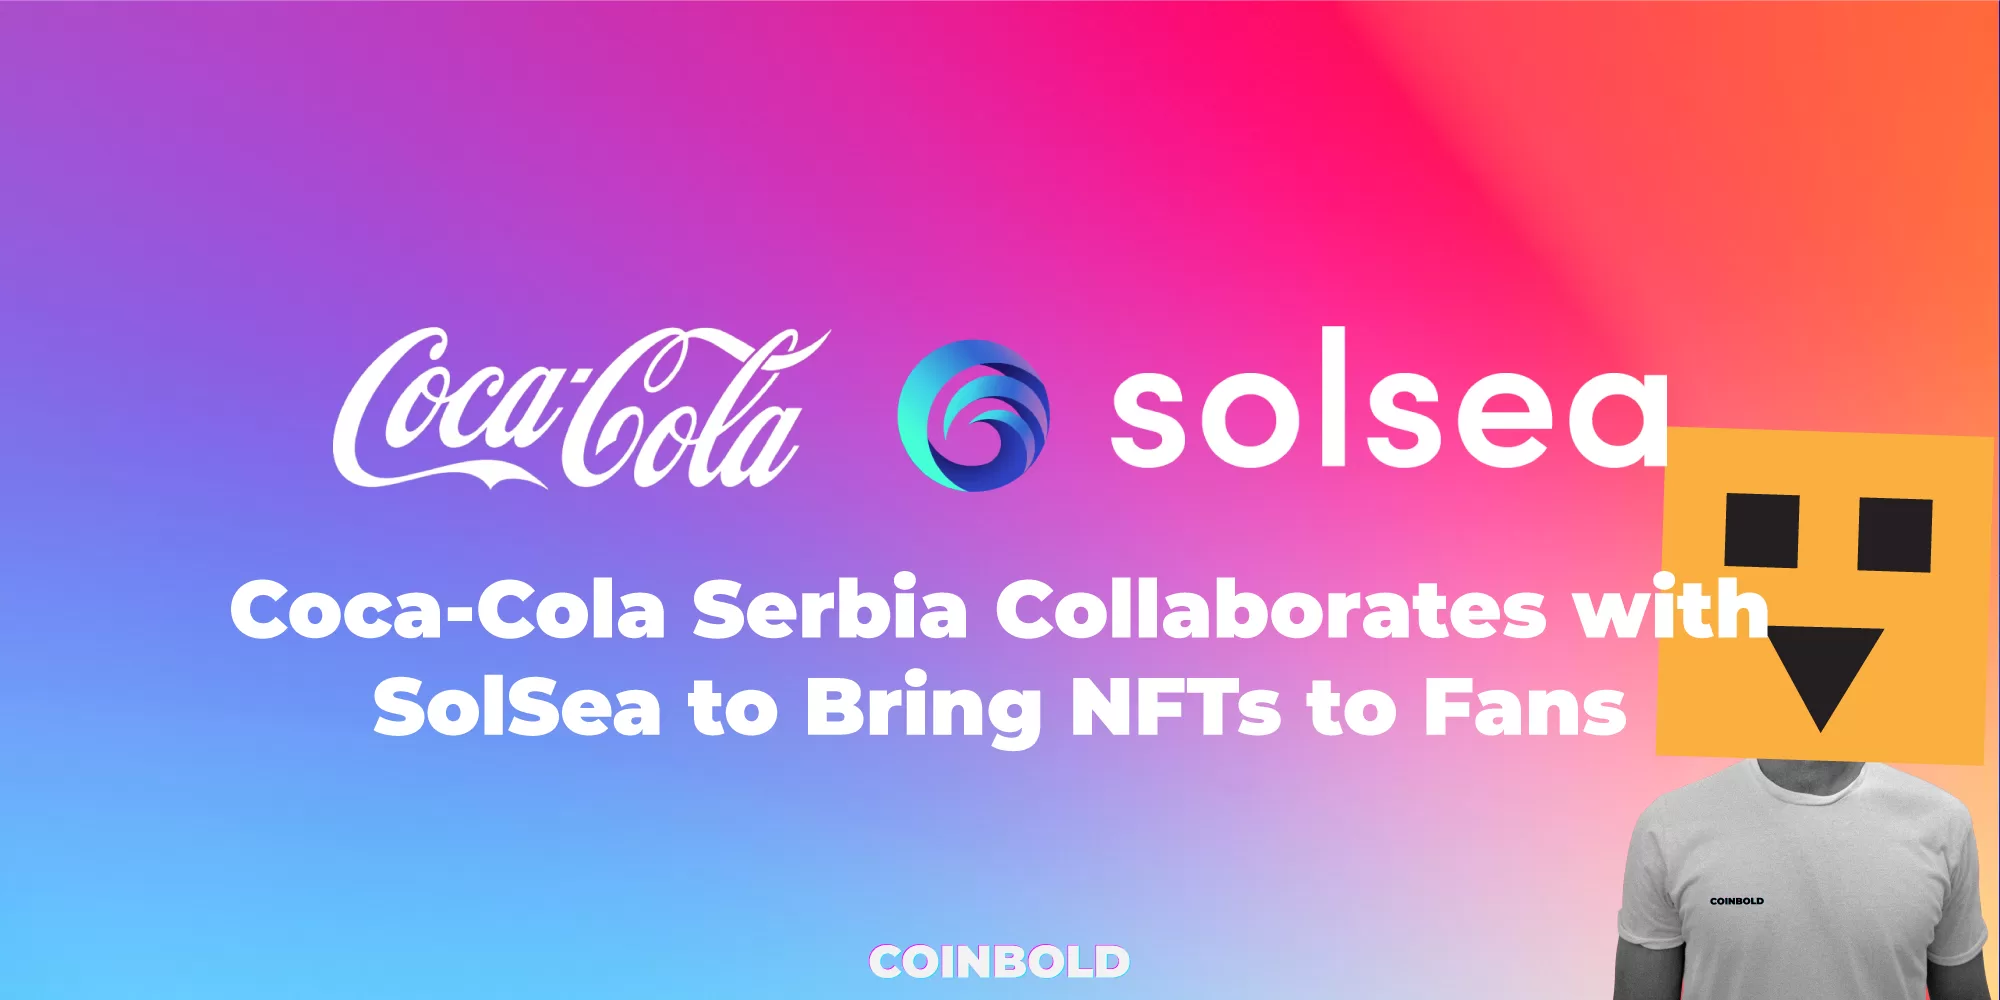 Coca-Cola Serbia Collaborates with SolSea to Bring NFTs to Fans